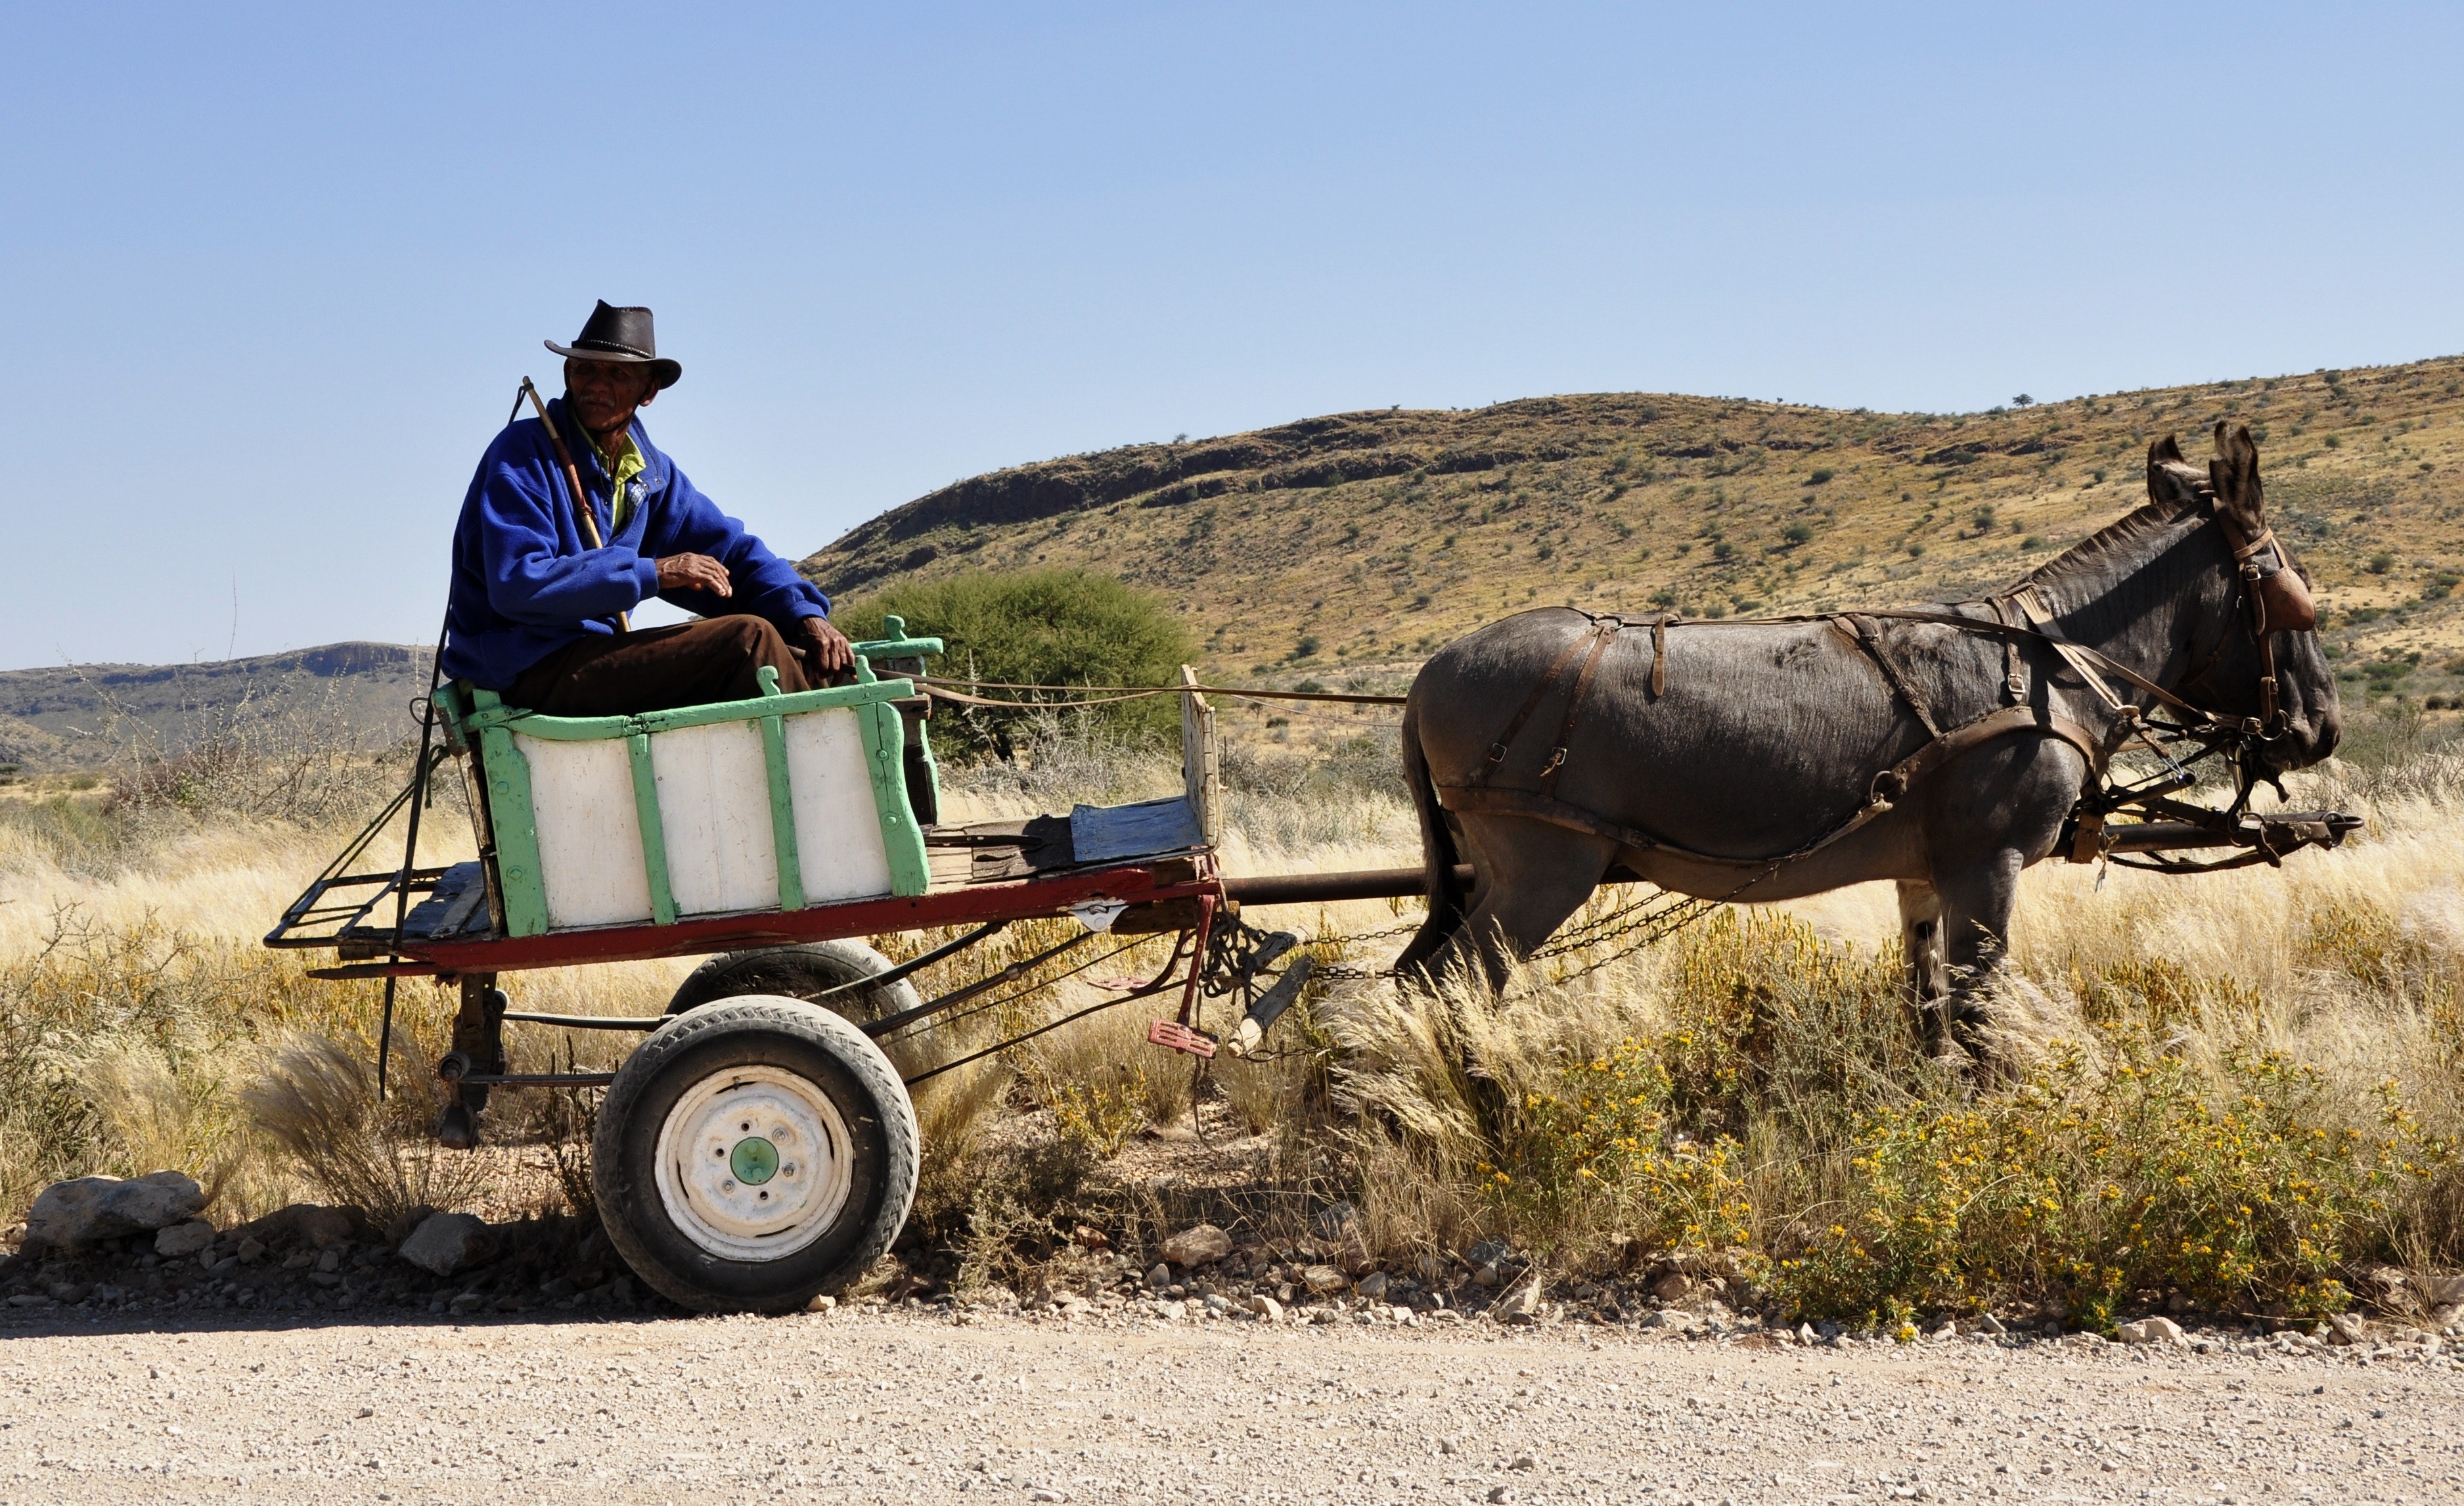 Man Riding on Carriage Pulled by Donkey Under Blue Sky during Daytime, Cart, Mammal, Savanna, Rocks, HQ Photo